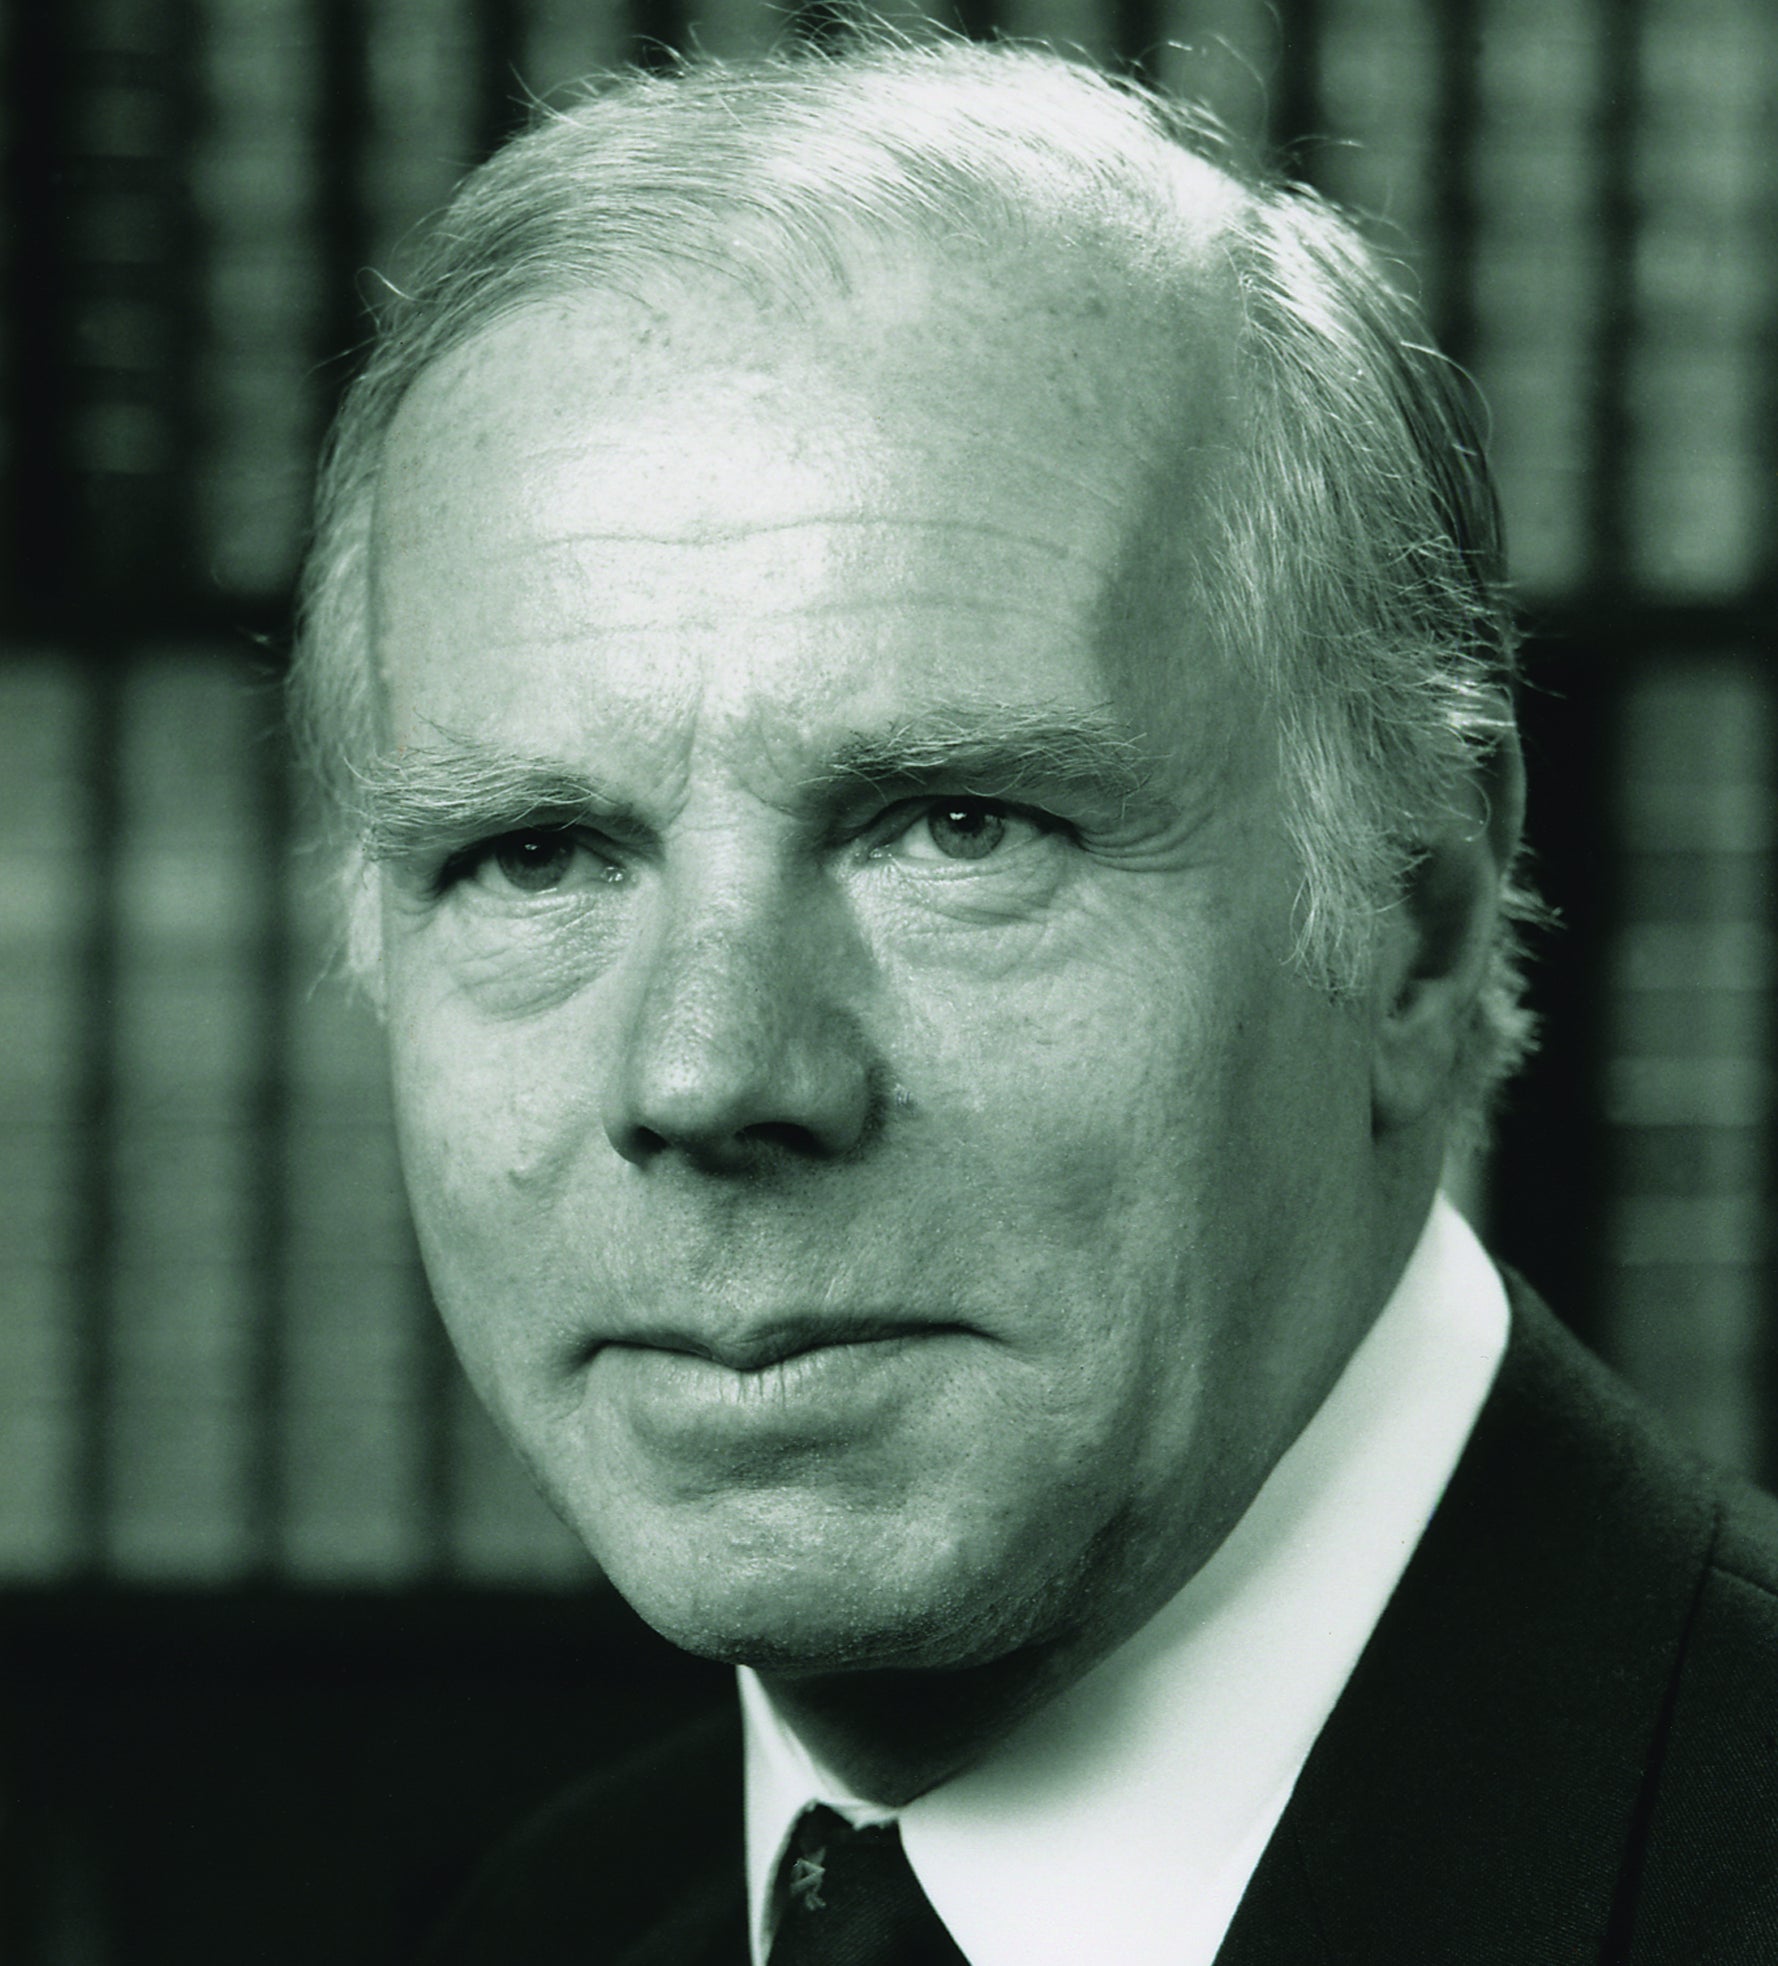 Professor Michael Oliver, photo from Family collection